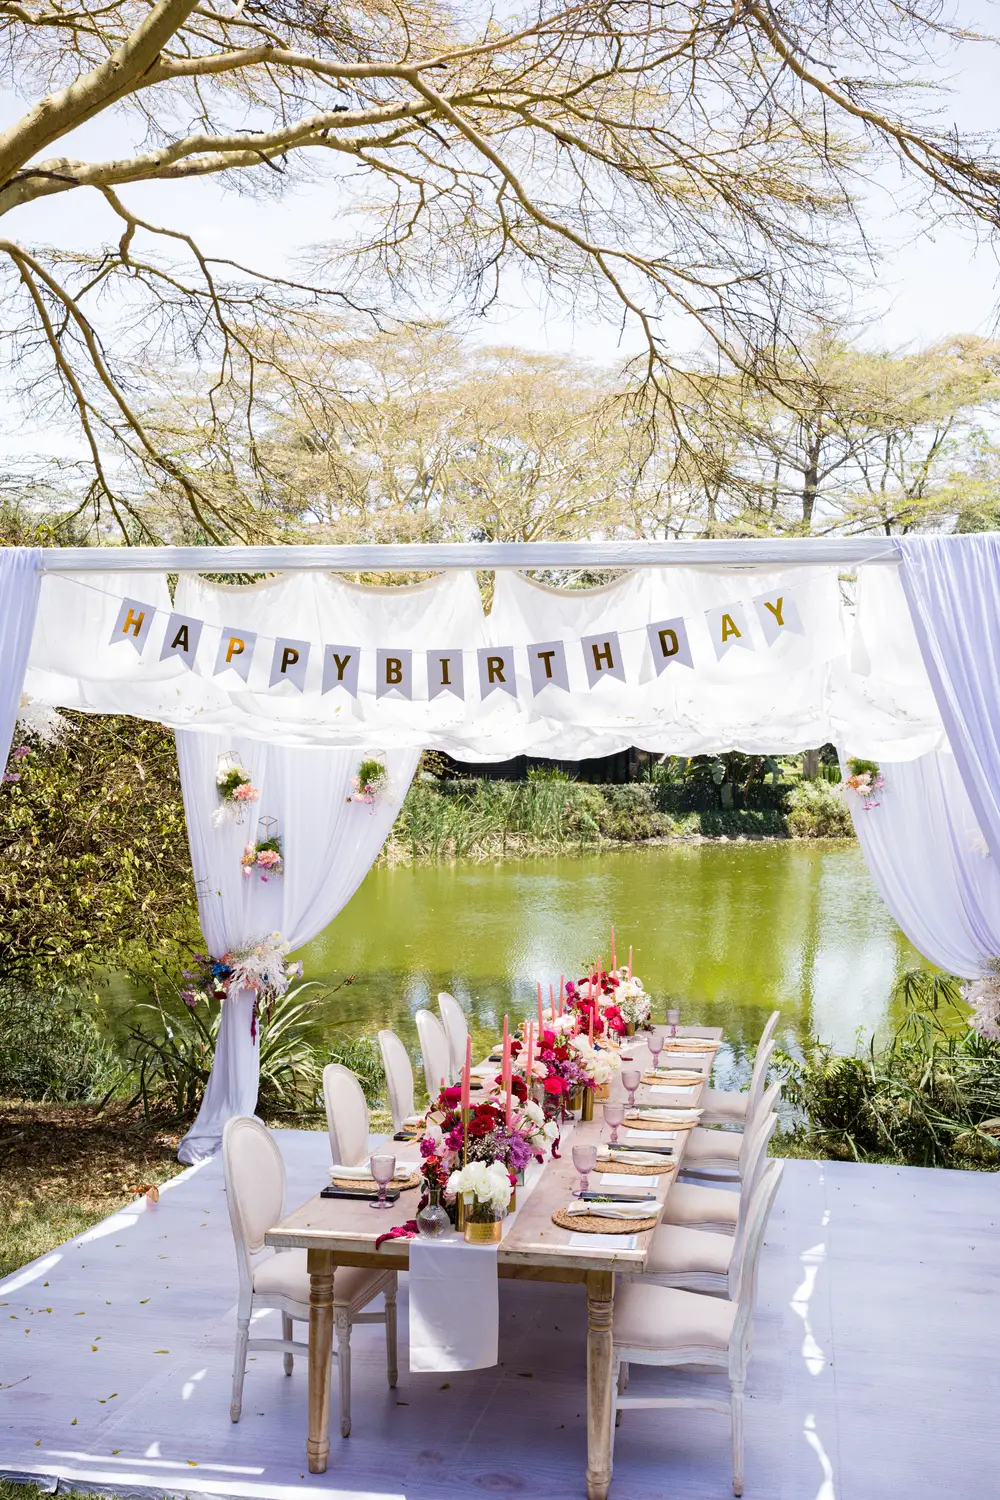 White themed birthday party by a river